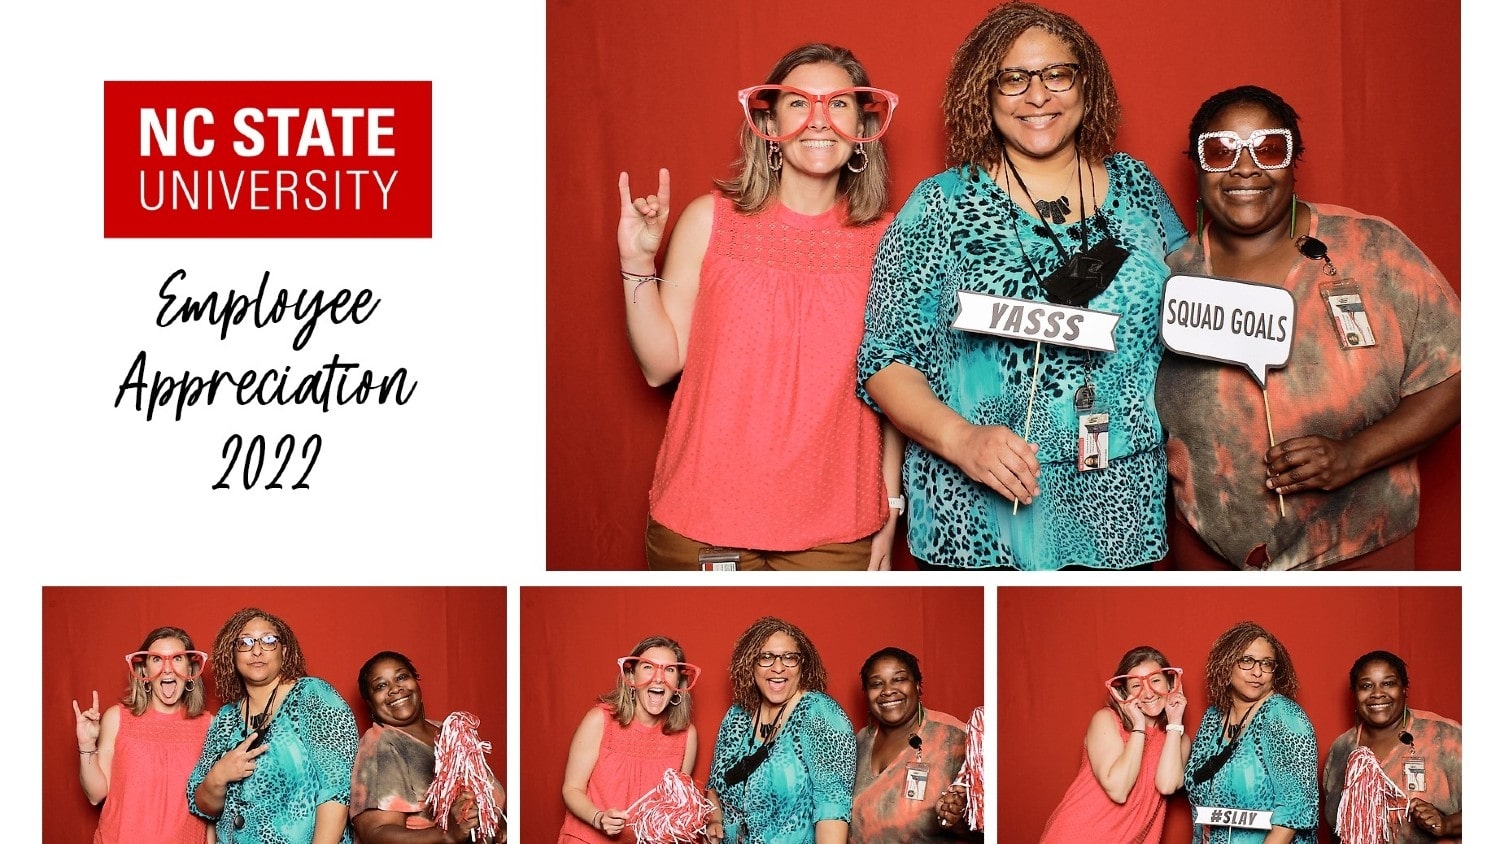 A group of NC State employees took pictures in a photo booth during a Staff and Faculty Appreciation Event on May 2.